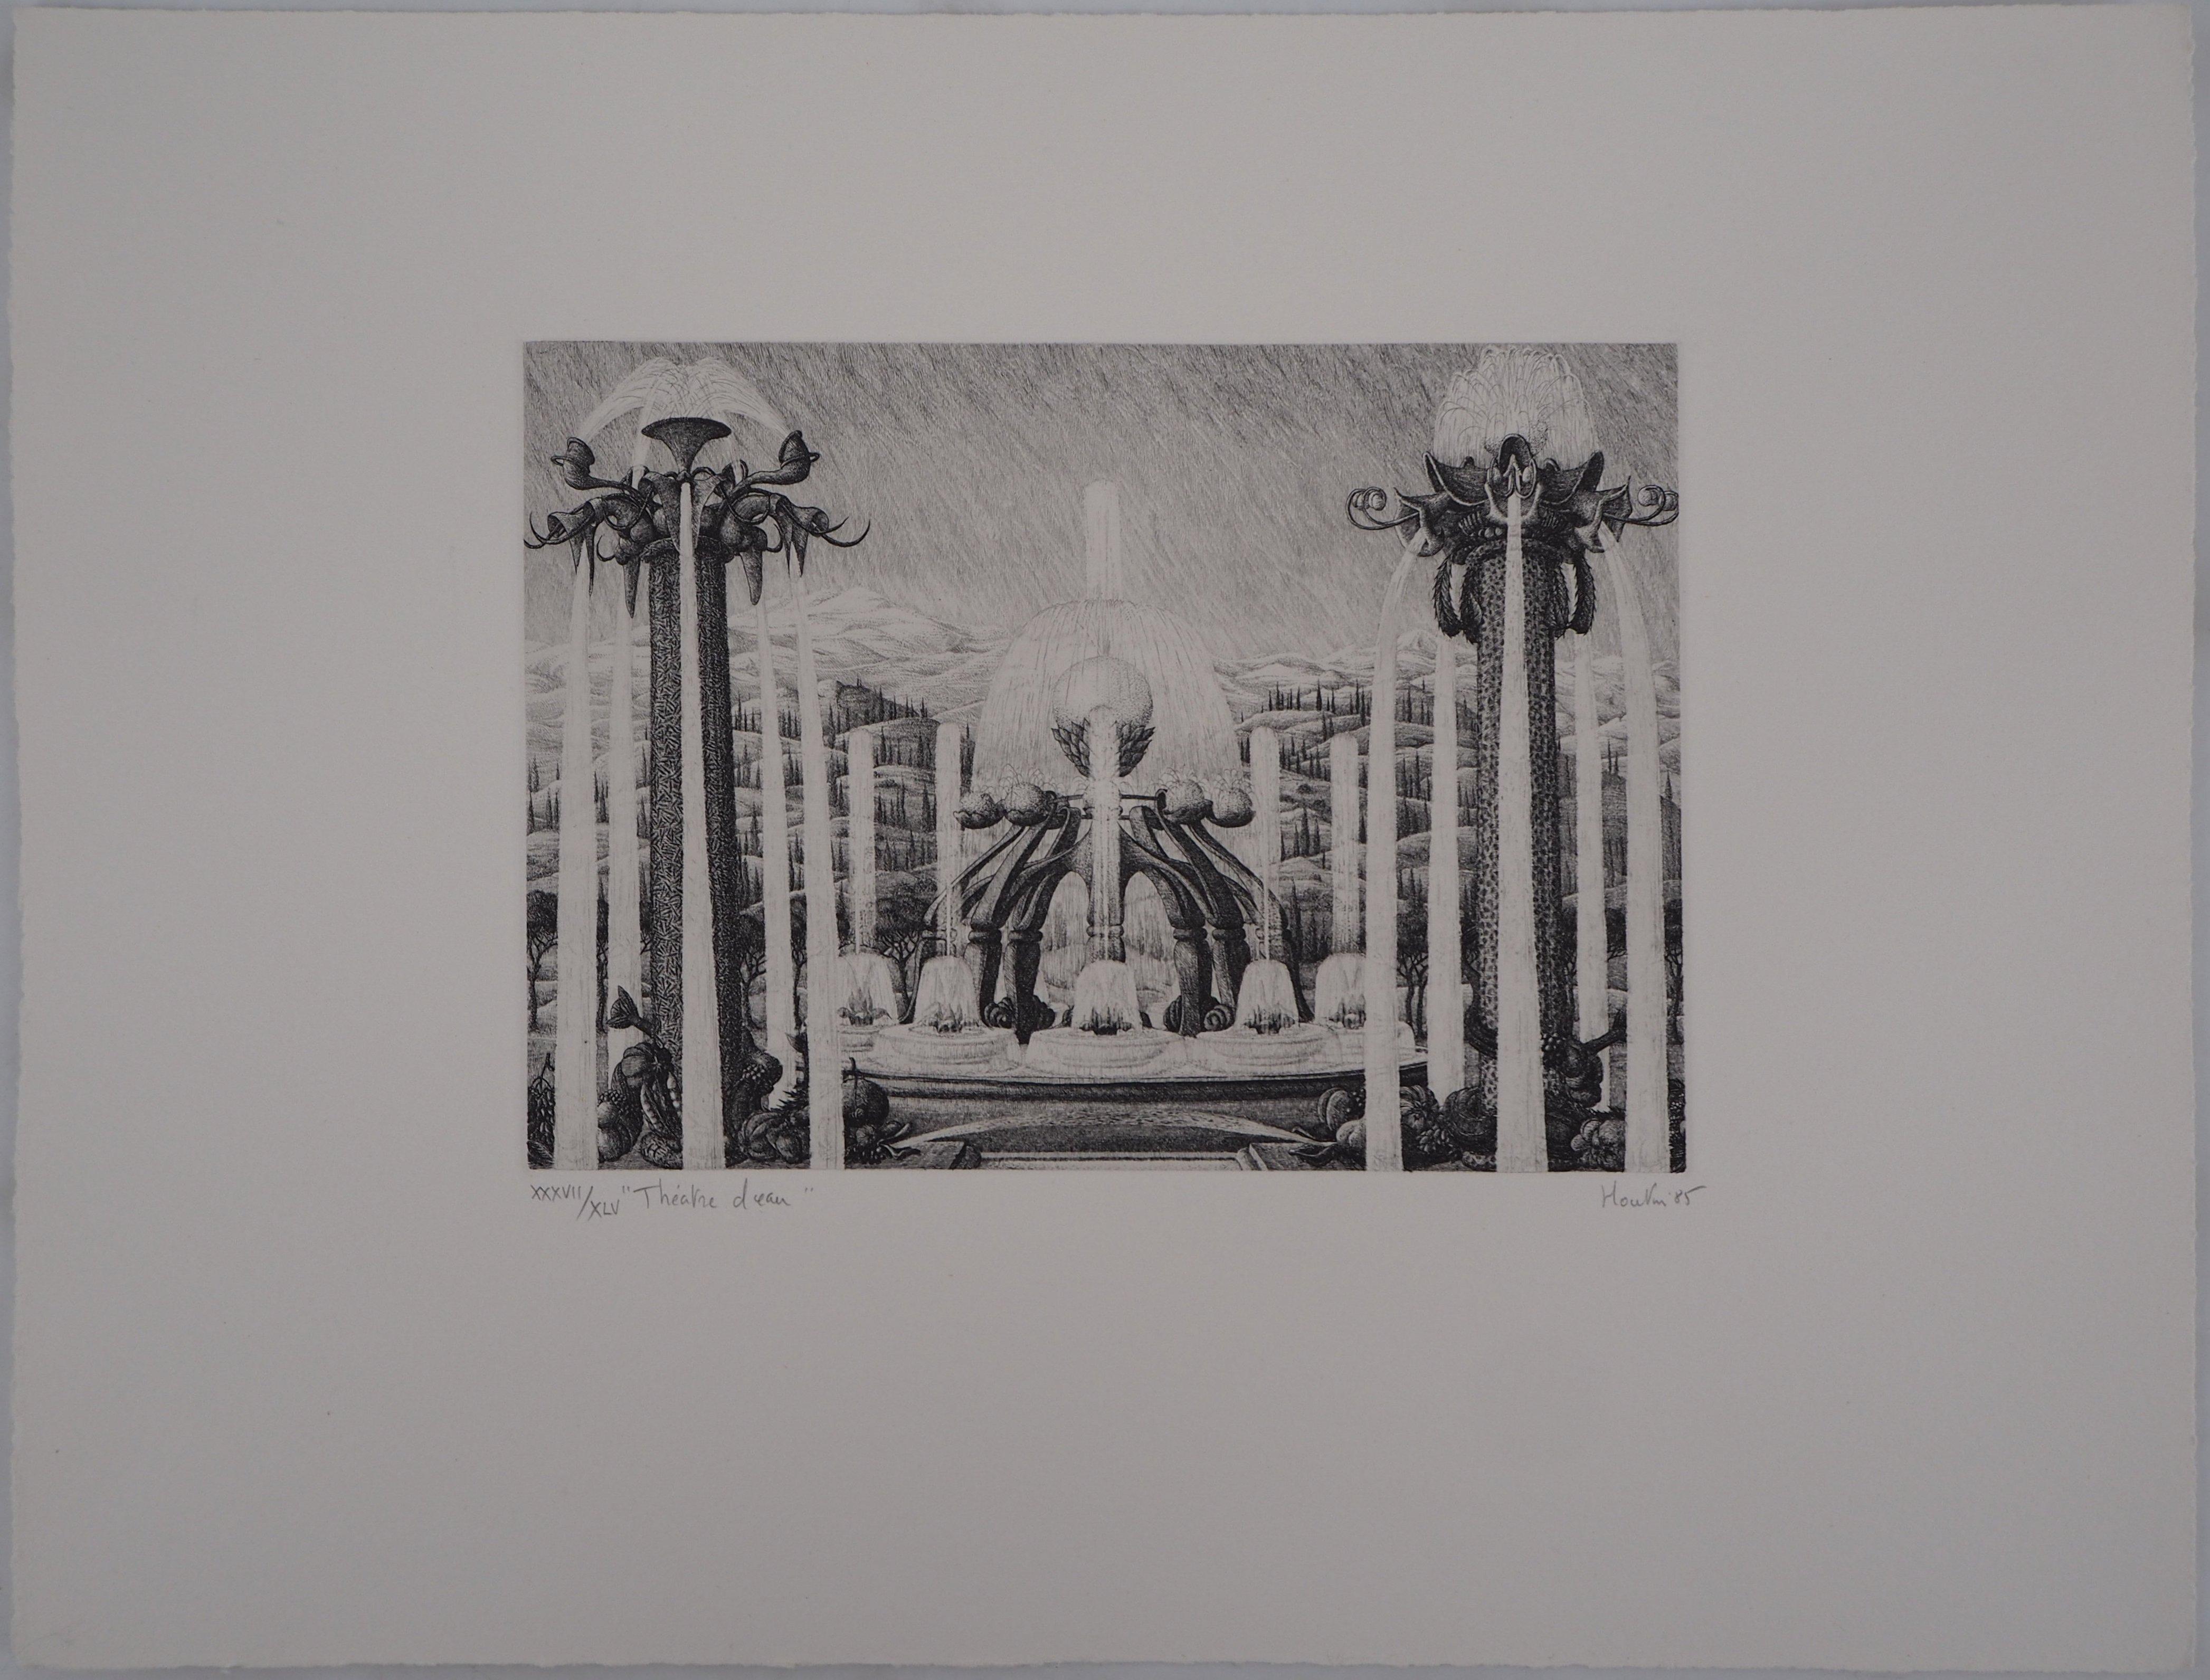 François Houtin Landscape Print - Versailles : The Fountains - Original etching, Handsigned and Ltd to 45 proofs